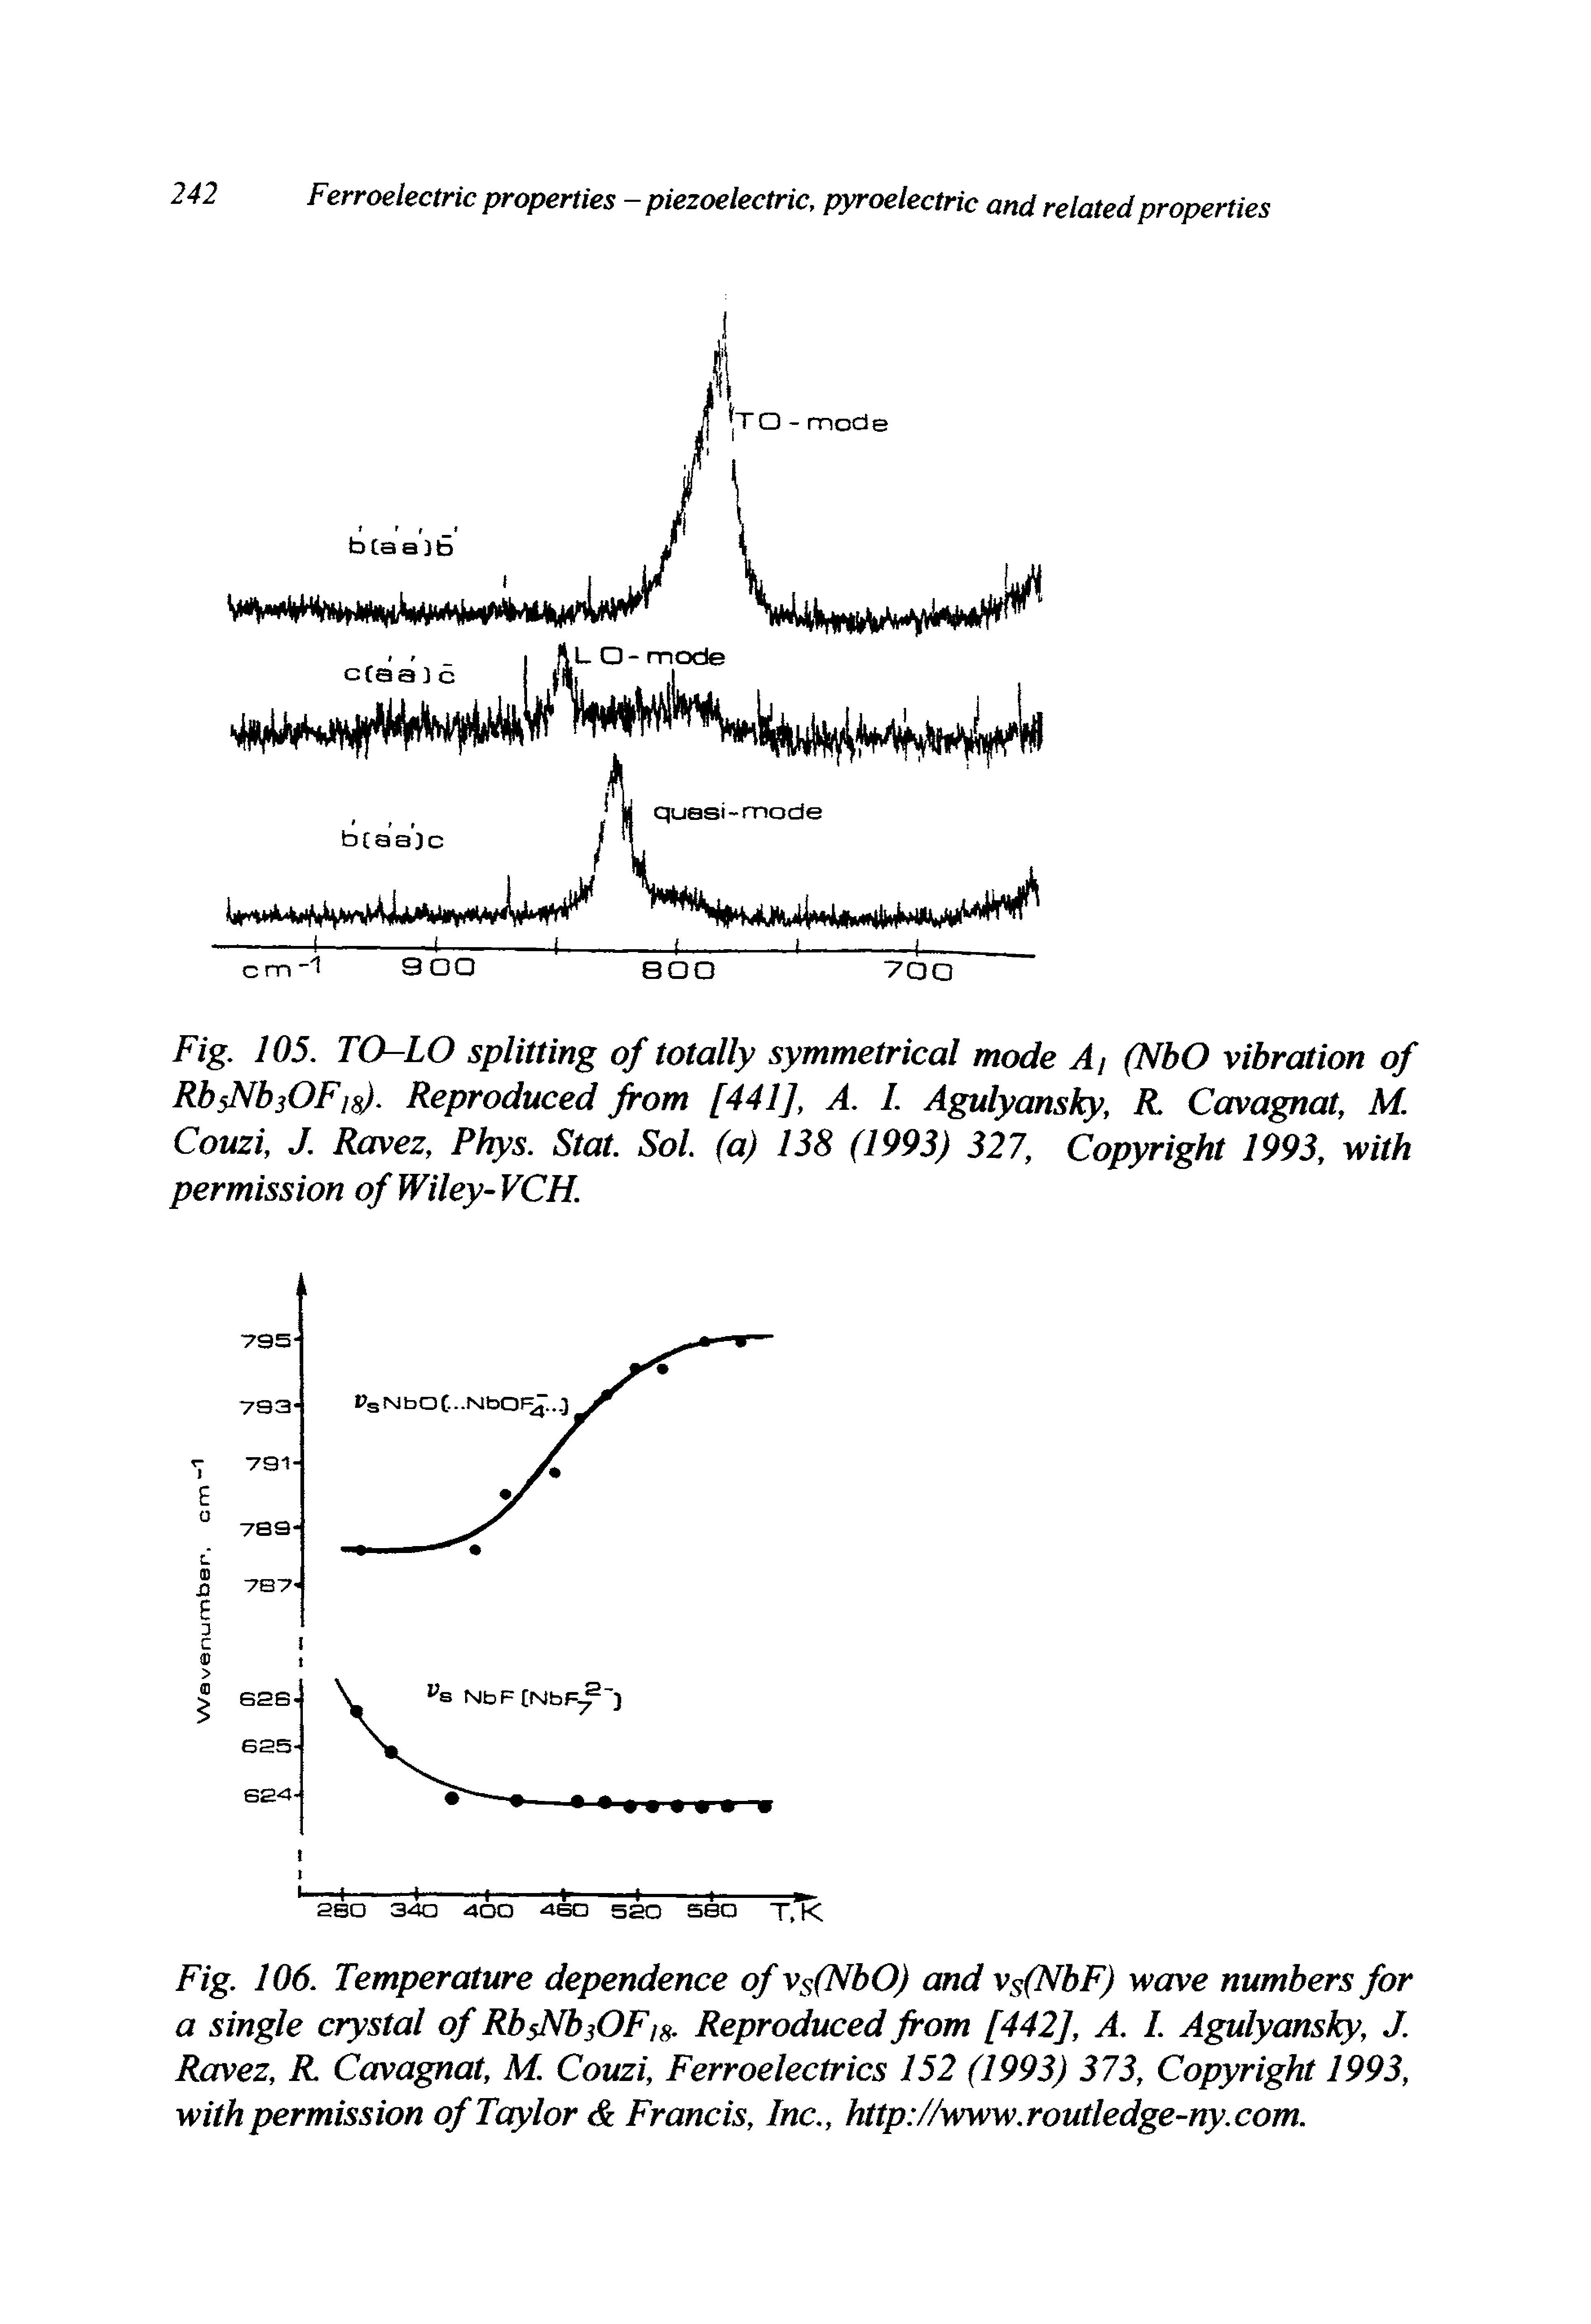 Fig. 106. Temperature dependence of vs(NbO) and vs(NbF) wave numbers for a single crystal of RbsNbsOF/s- Reproduced from [442], A. I. Agulyansky, J. Ravez, R. Cavagnat, M. Couzi, Ferroelectrics 152 (1993) 373, Copyright 1993, with permission of Taylor Francis, Inc., http //www.routledge-ny.com.